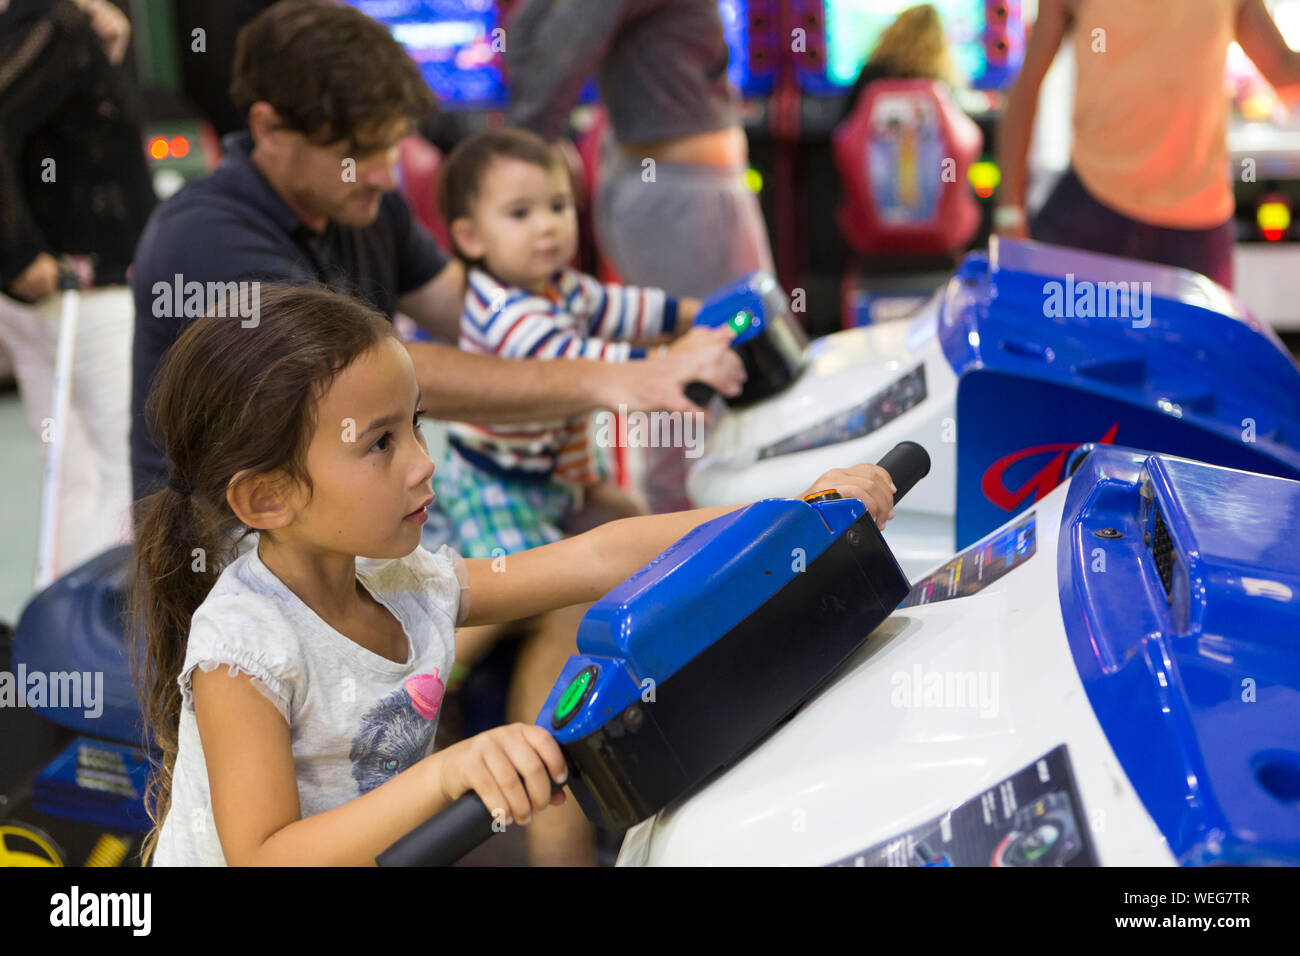 8-9 year old mixed ethnicity Asian girl on game at fairground, father and younger brother in background Stock Photo